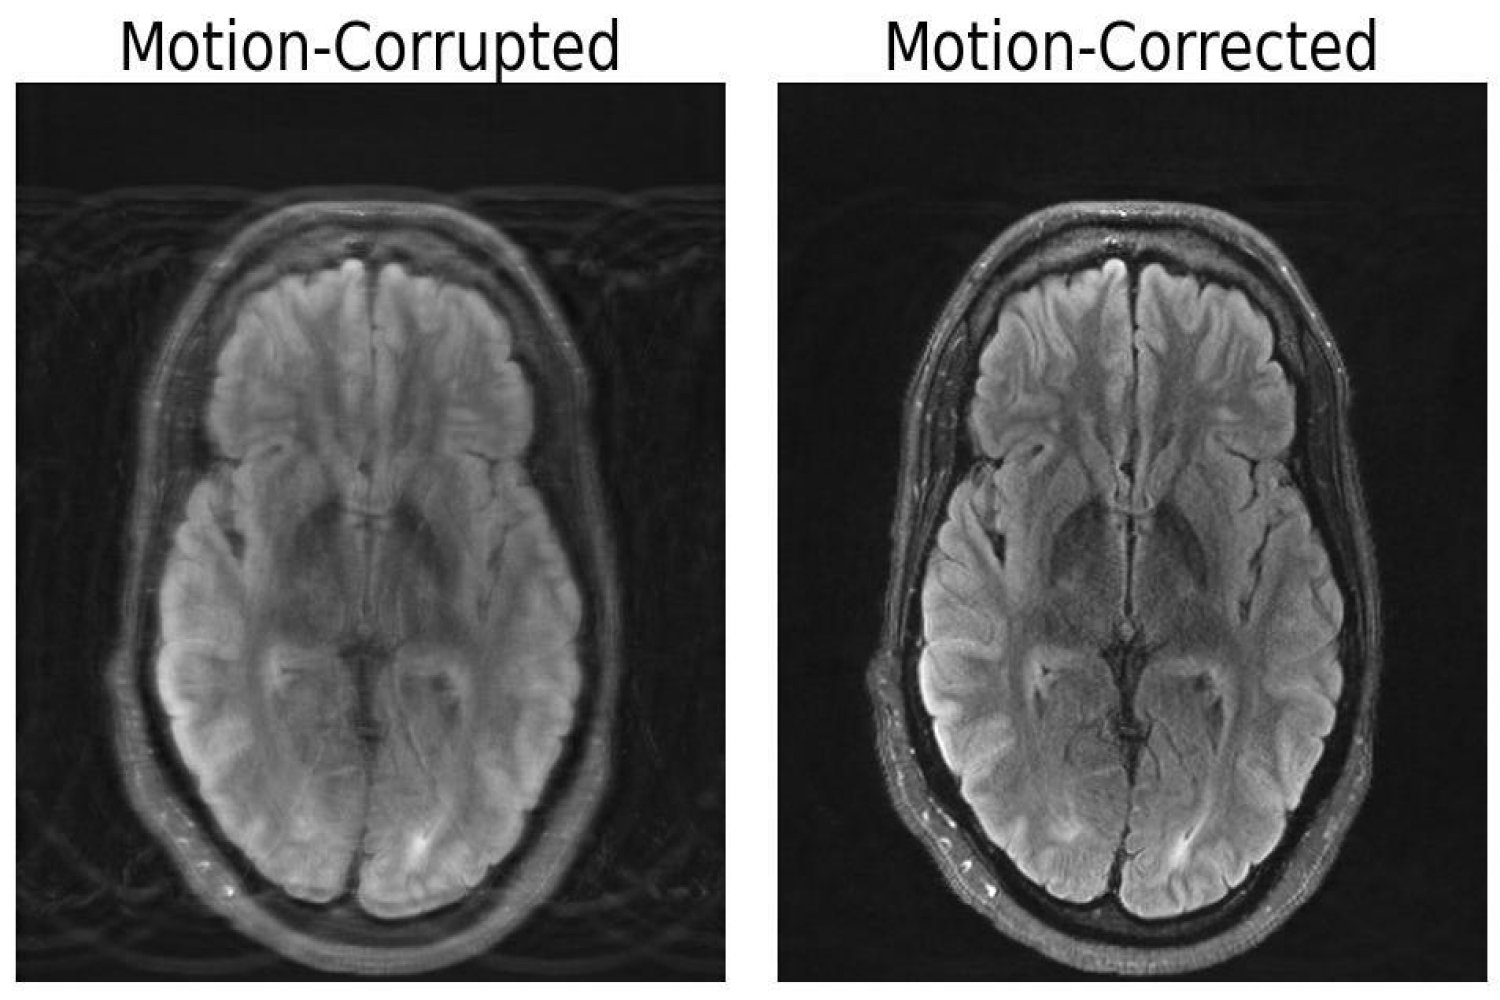 MIT researchers combine deep learning and physics to fix motion-corrupted MRI scans